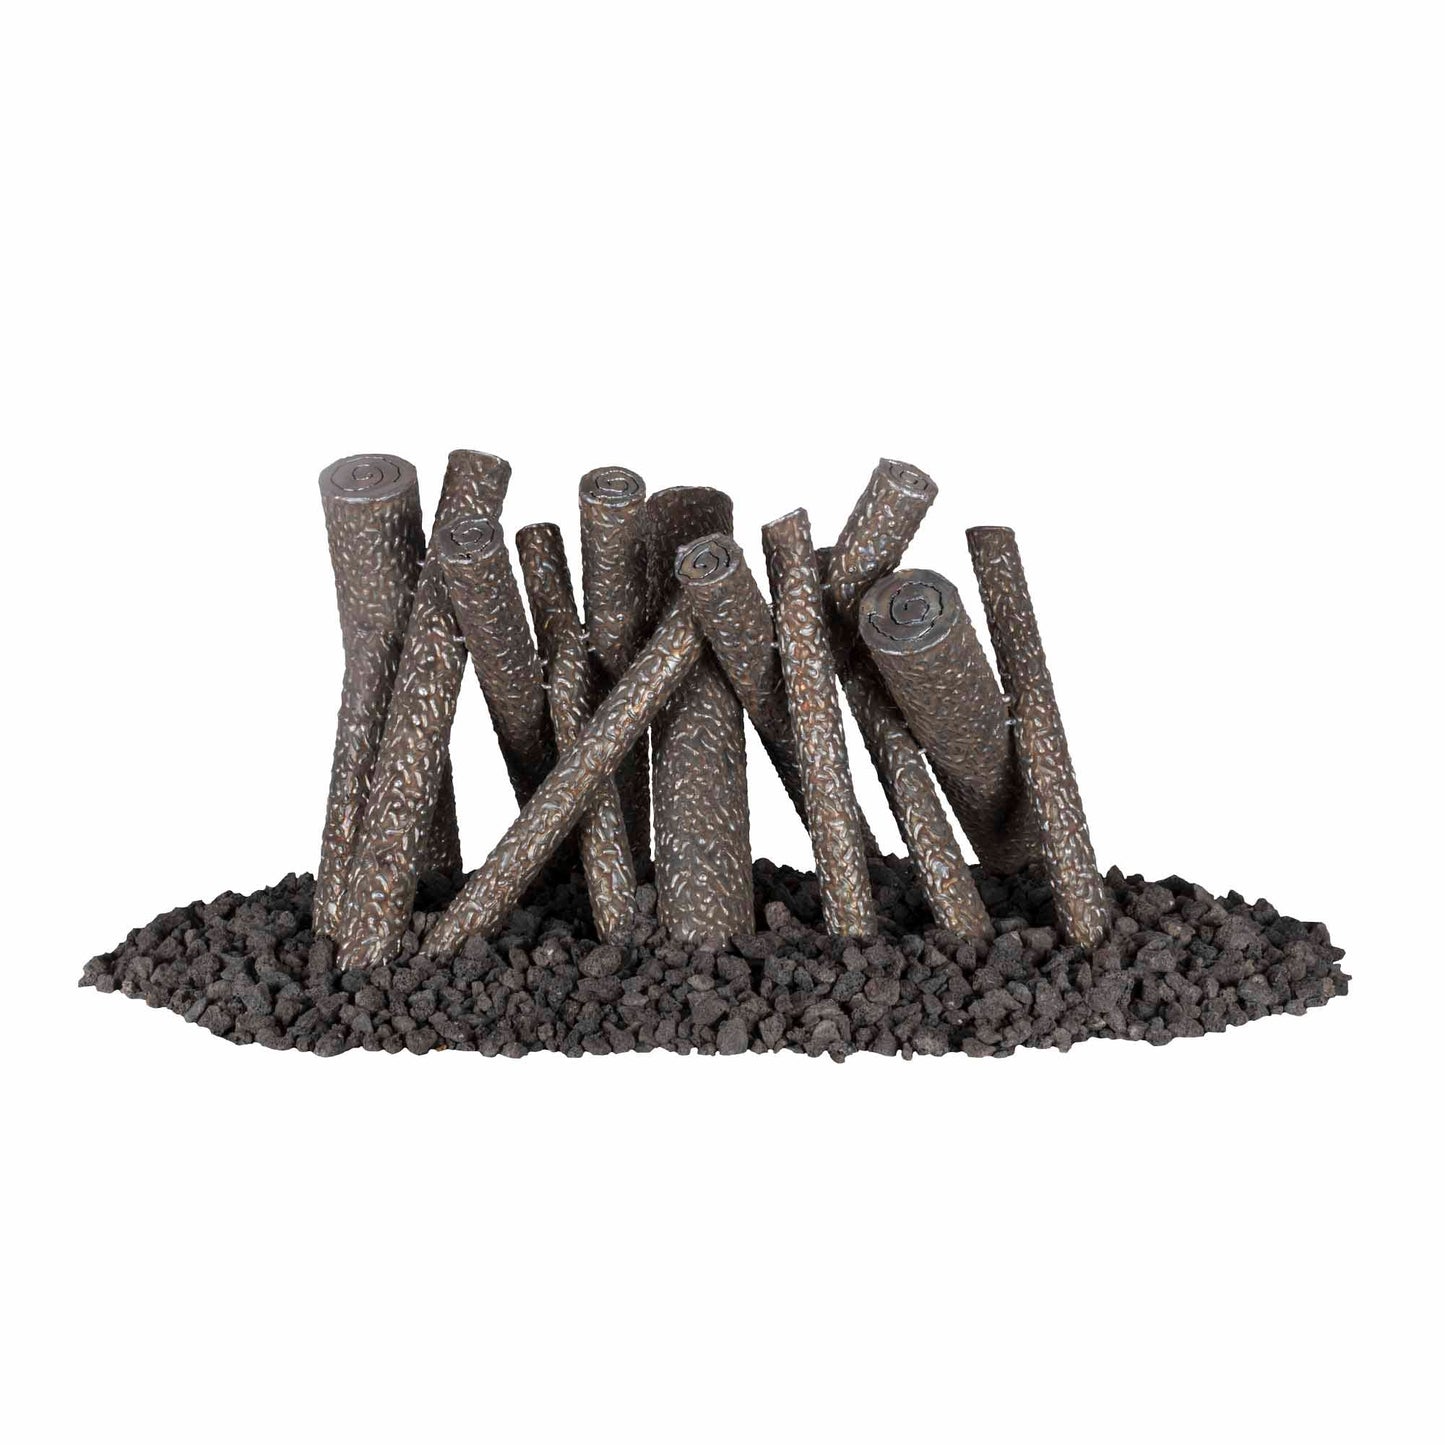 The Outdoor Plus 24" Stainless Steel Upright Logs Ornament